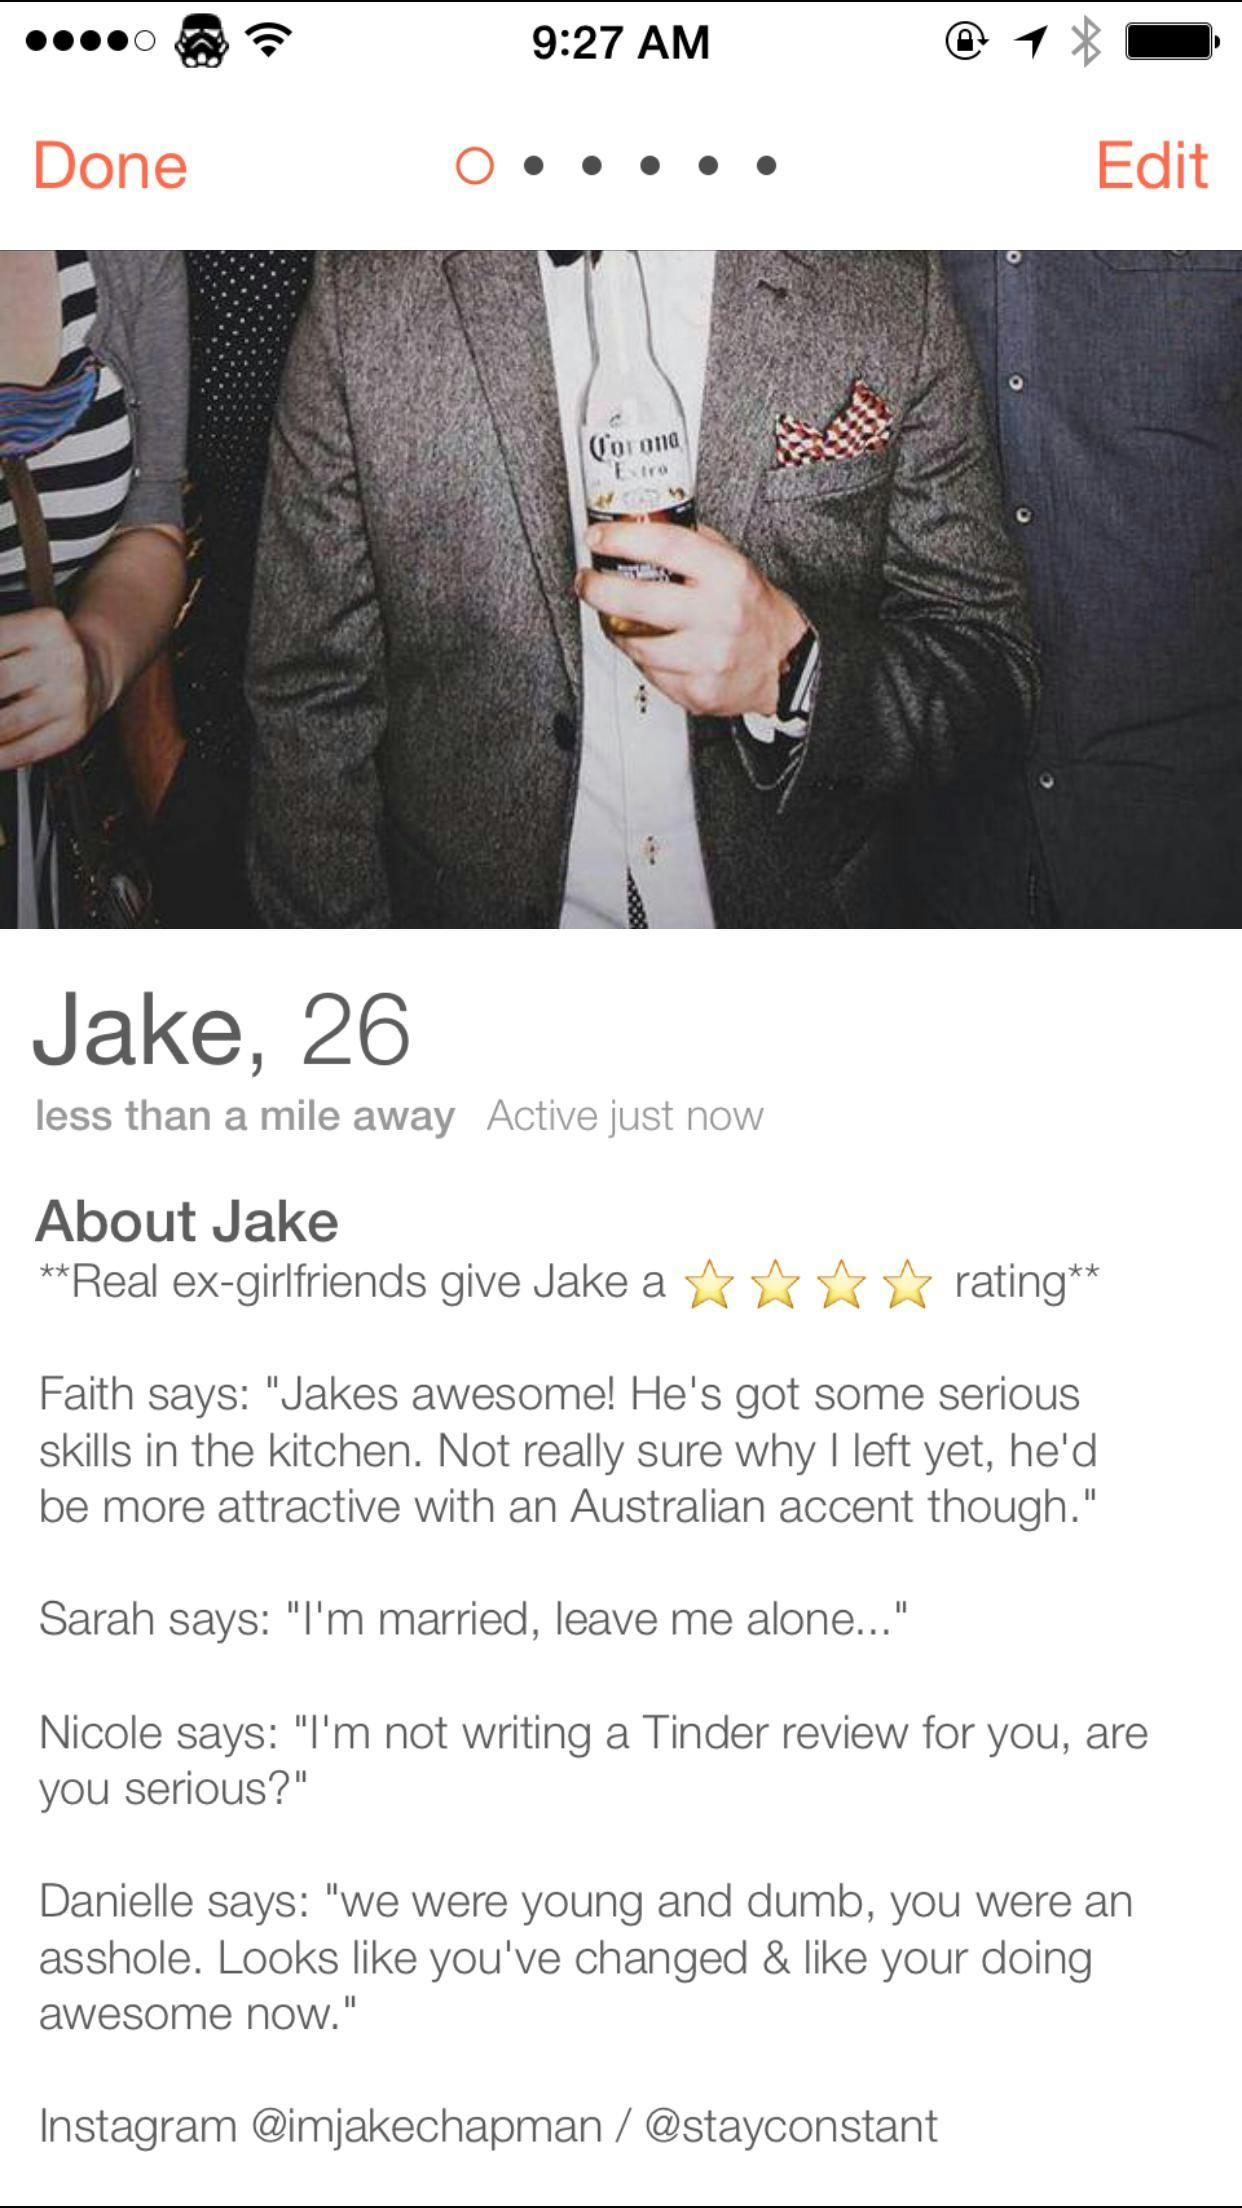 Man Goes Viral After Enlisting Ex-Girlfriends to Review Him on Tinder